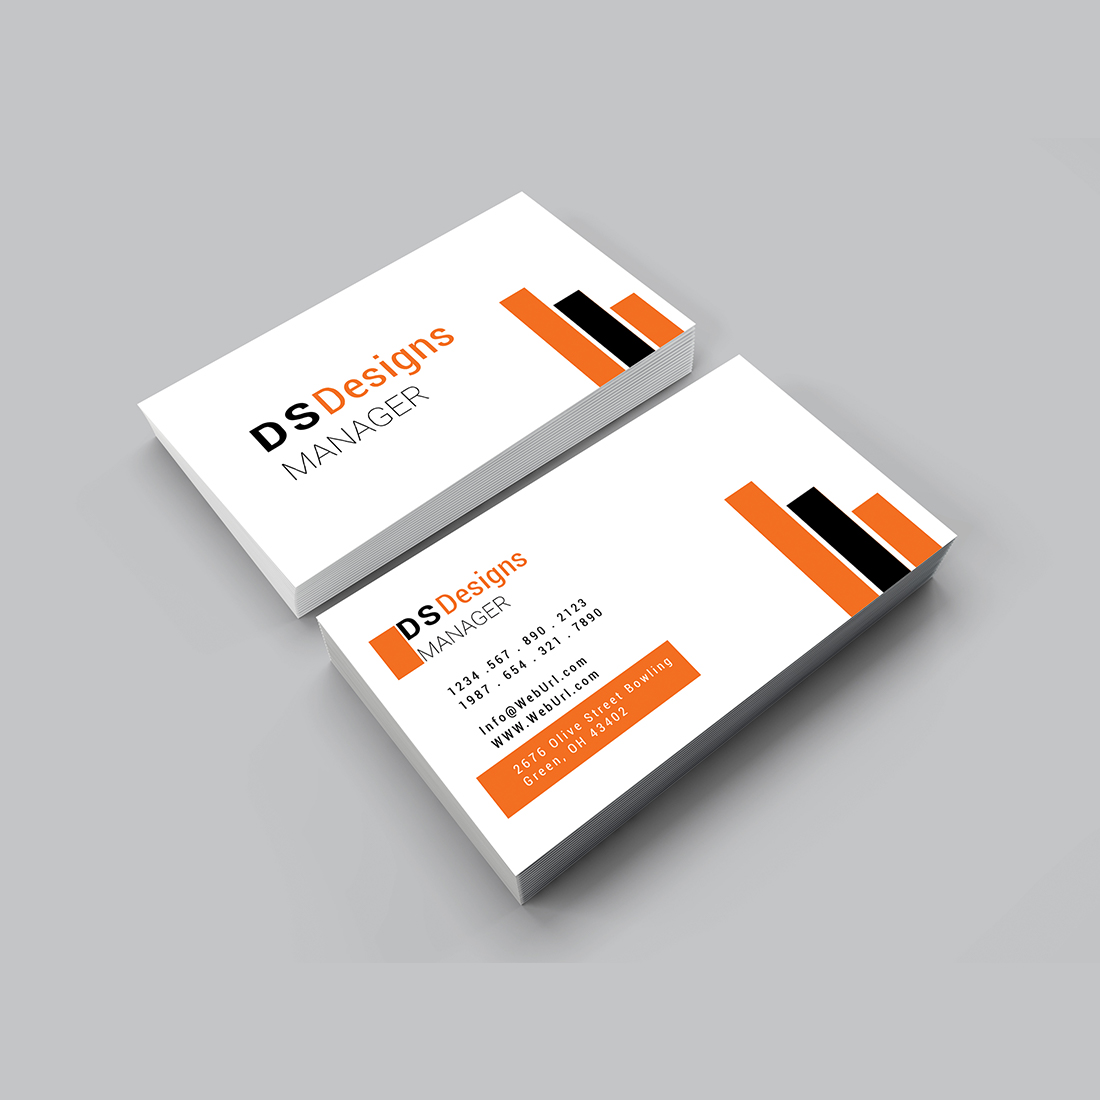 Simple business card design cover image.